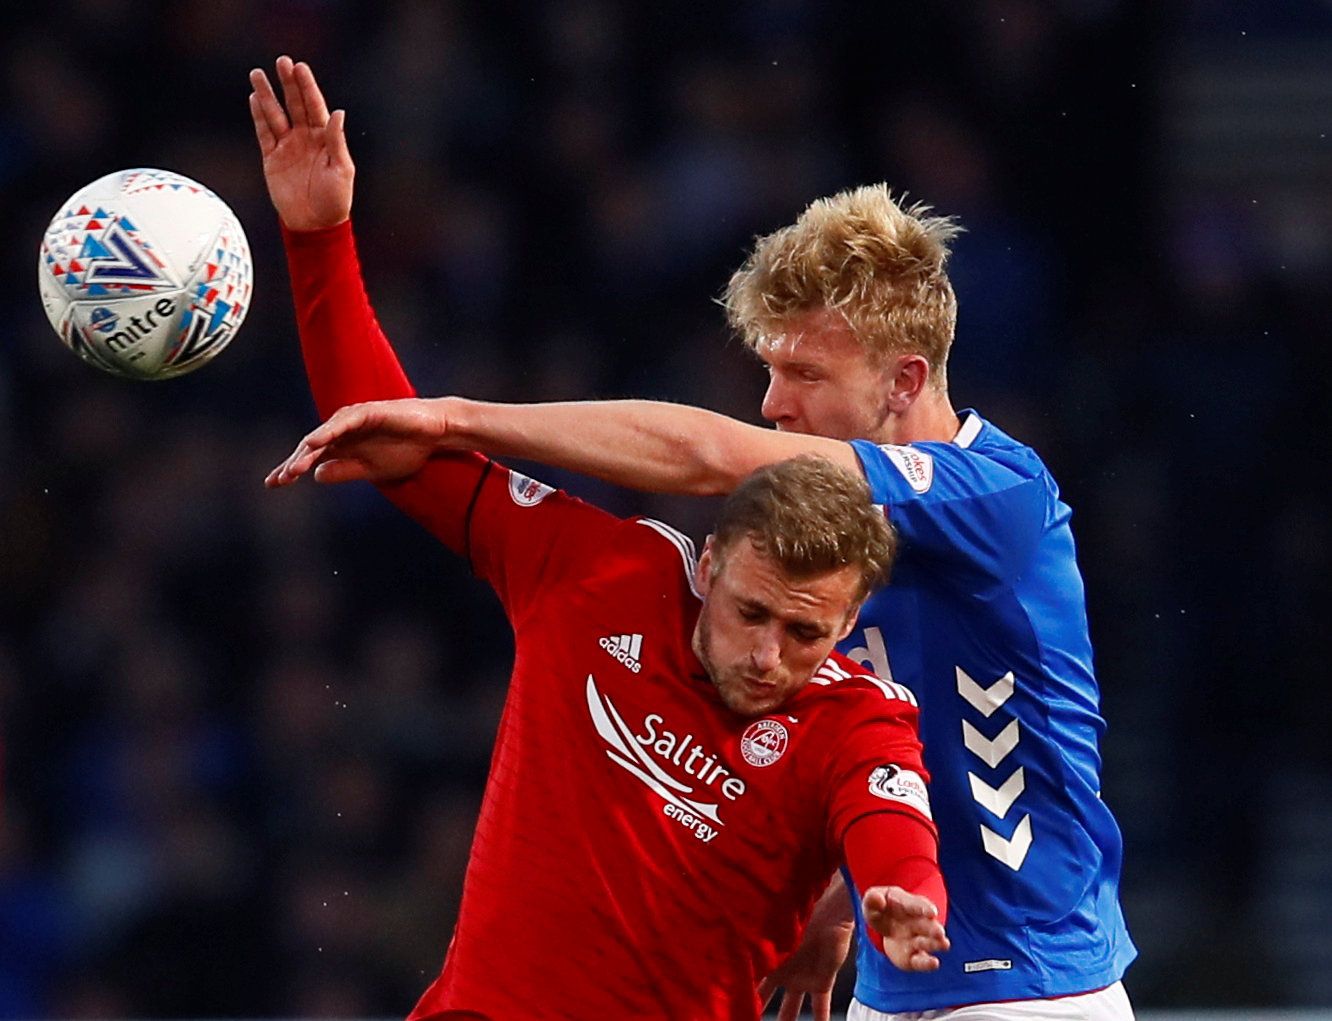 Soccer Football - Scottish League Cup Semi Final - Aberdeen v Rangers - Hampden Park, Glasgow, Britain - October 28, 2018  Aberdeen's James Wilson in action with Rangers' Joe Worrall           Action Images via Reuters/Jason Cairnduff  EDITORIAL USE ONLY. No use with unauthorized audio, video, data, fixture lists, club/league logos or 